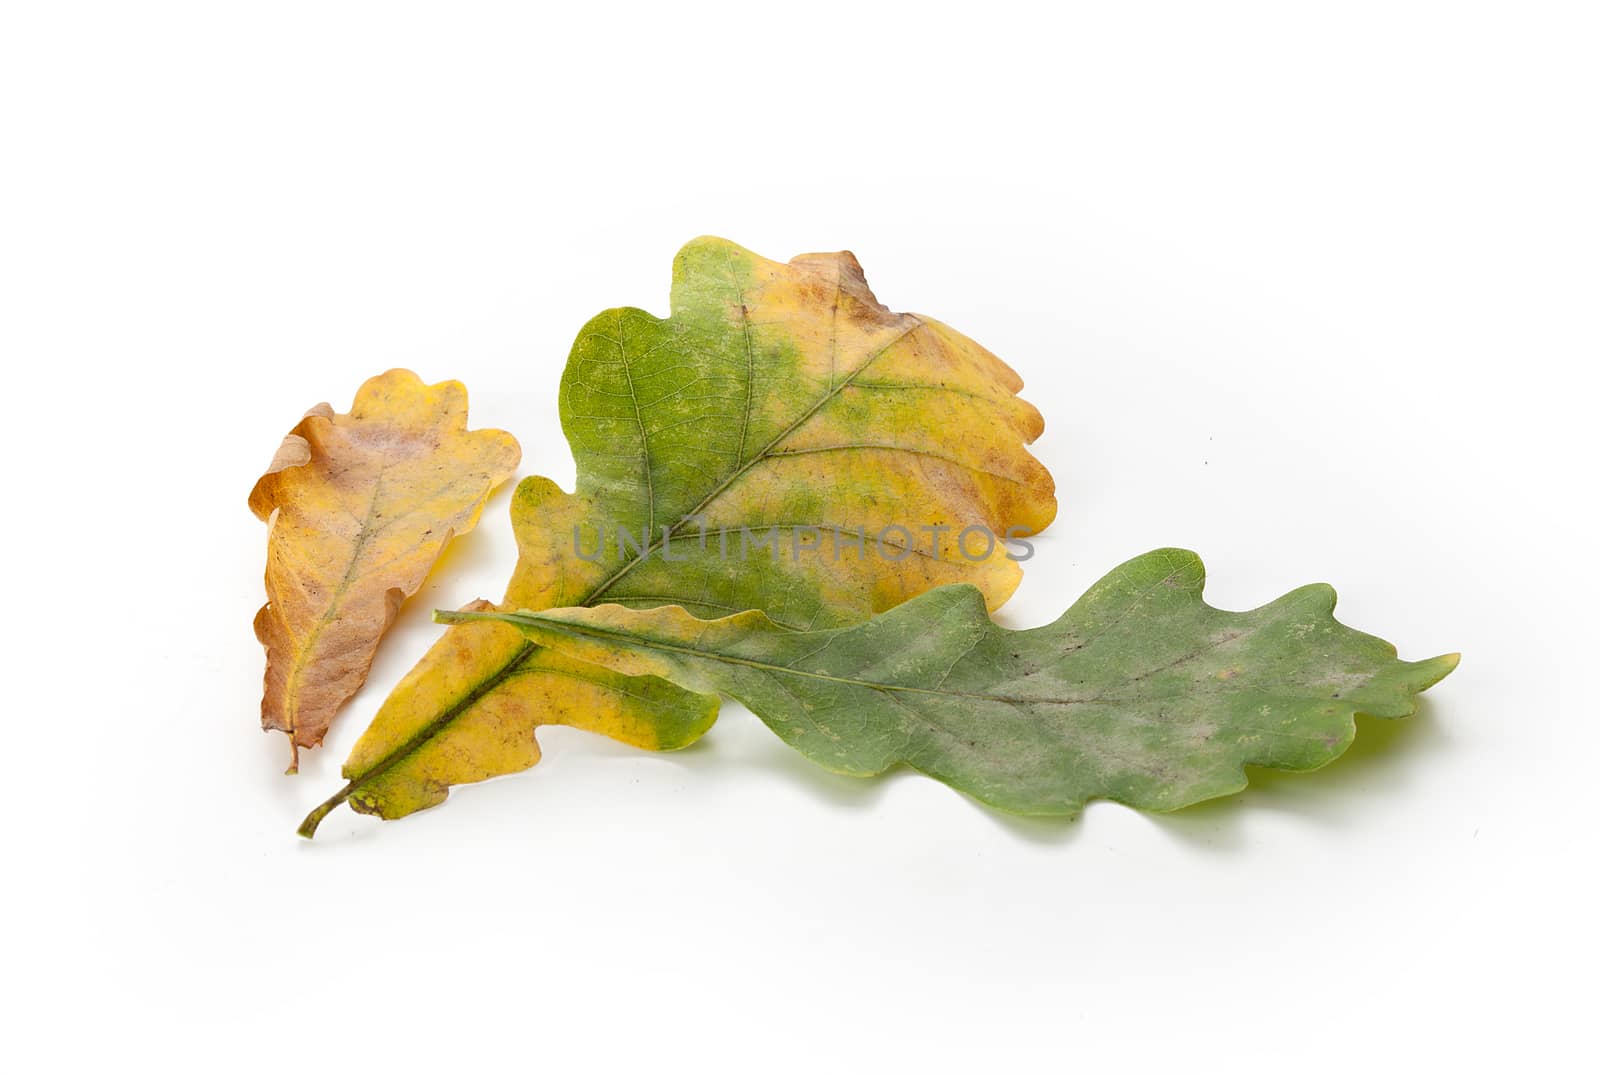 Green and yellow oak leaves by Angorius